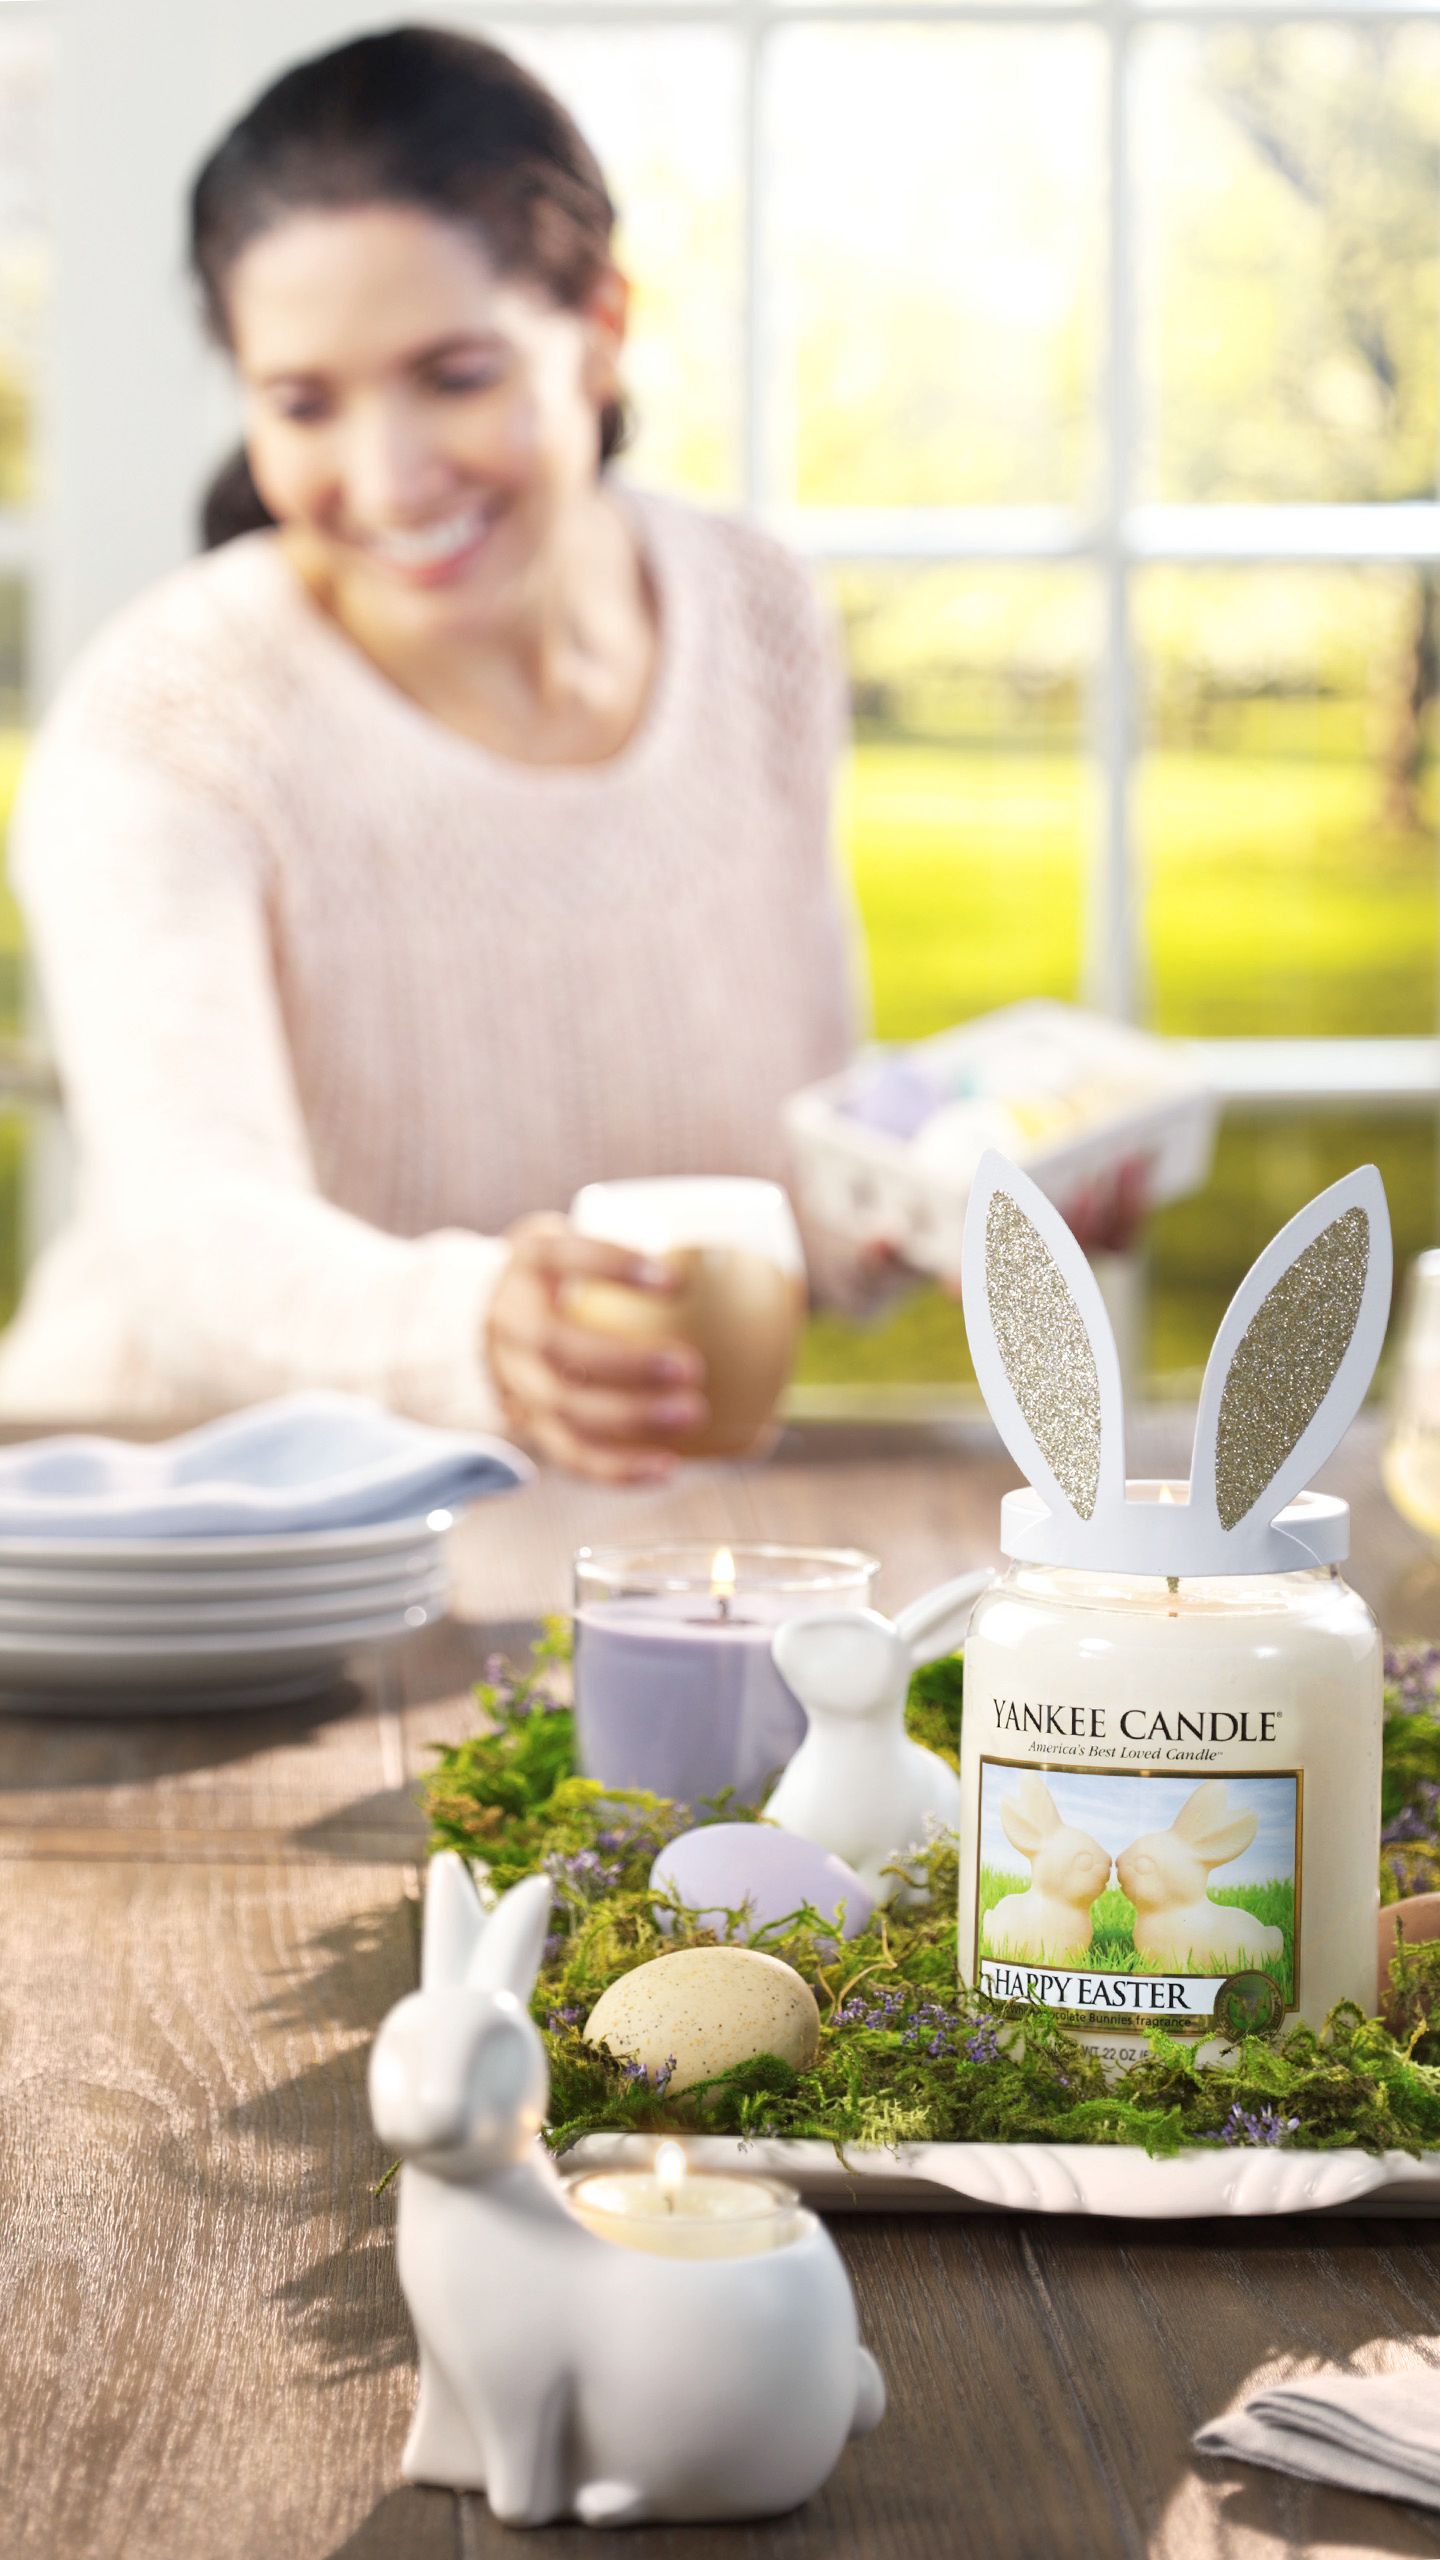 Product photo of Yankee Candle with people